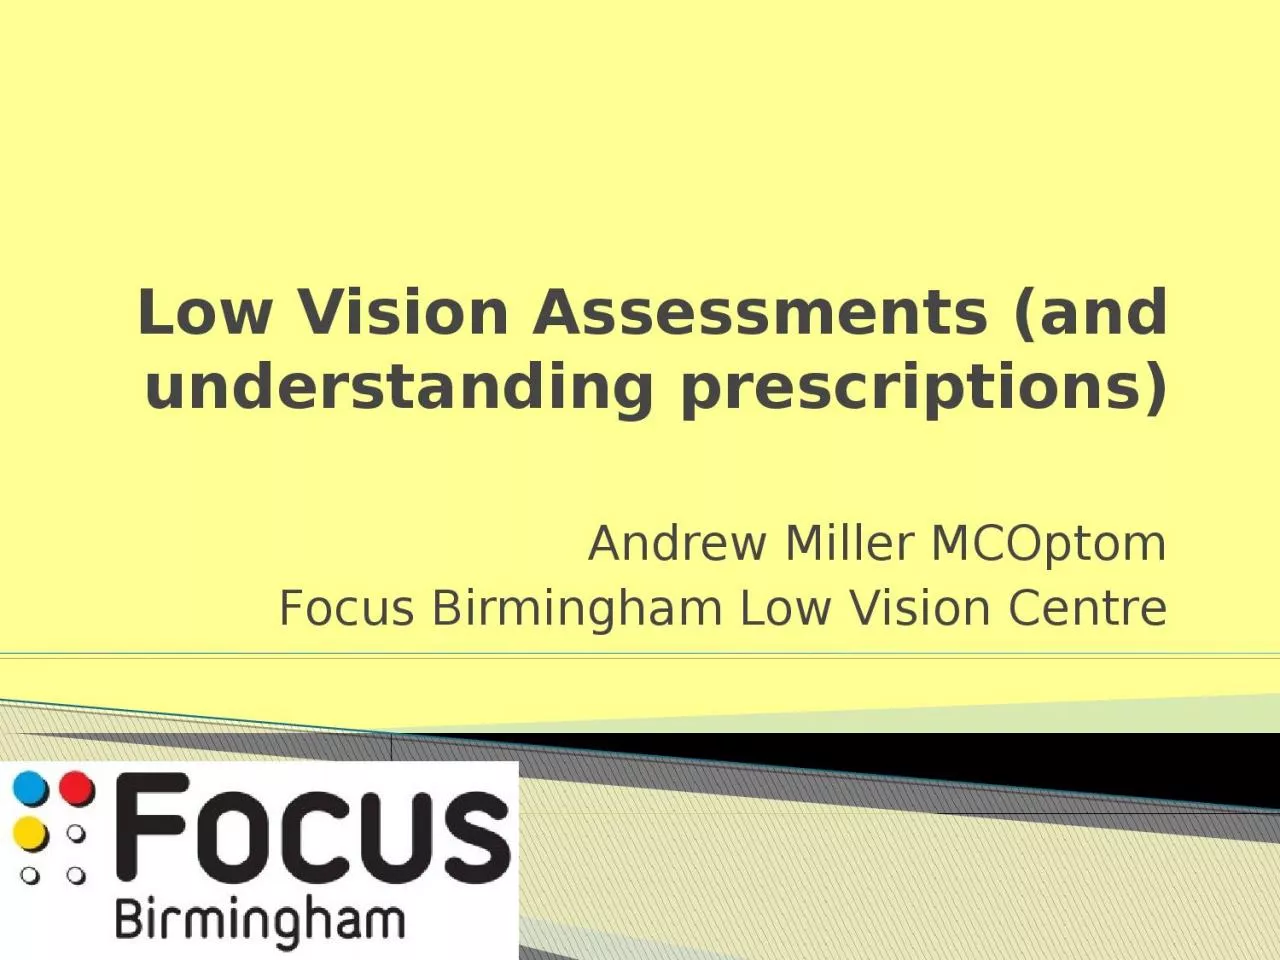 Low Vision Assessments (and understanding prescriptions)